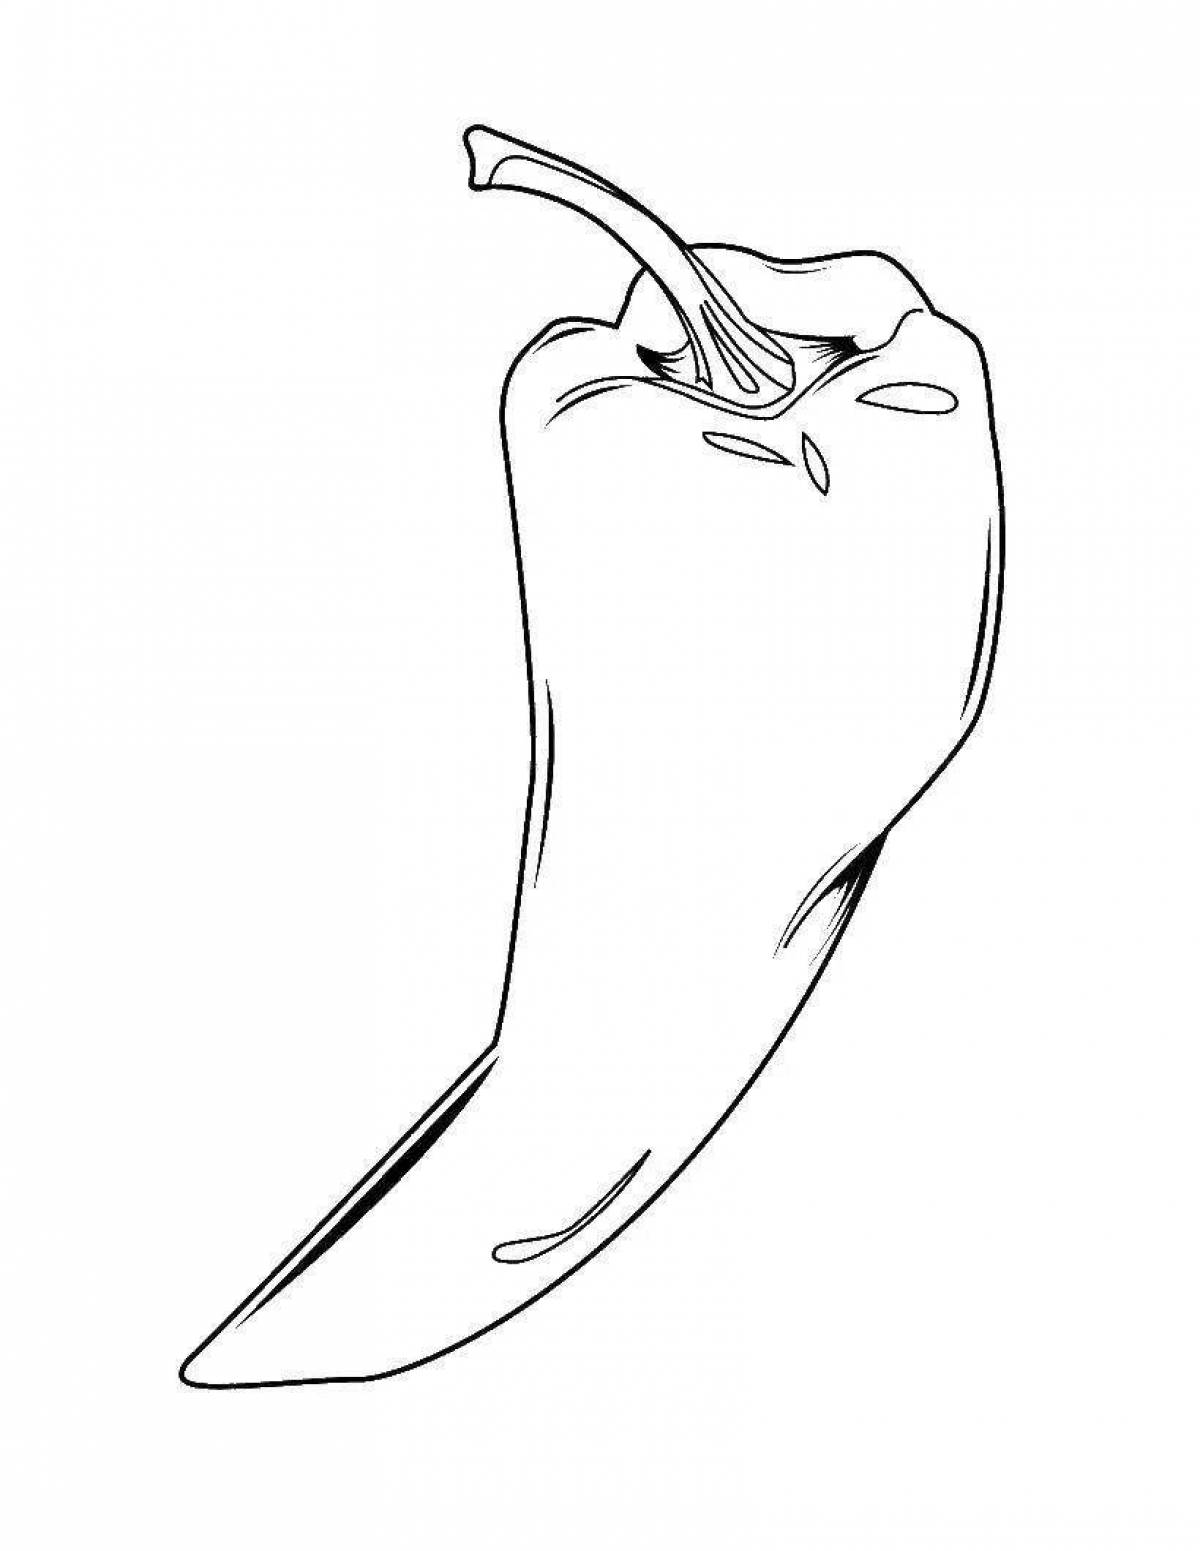 Animated chili coloring page